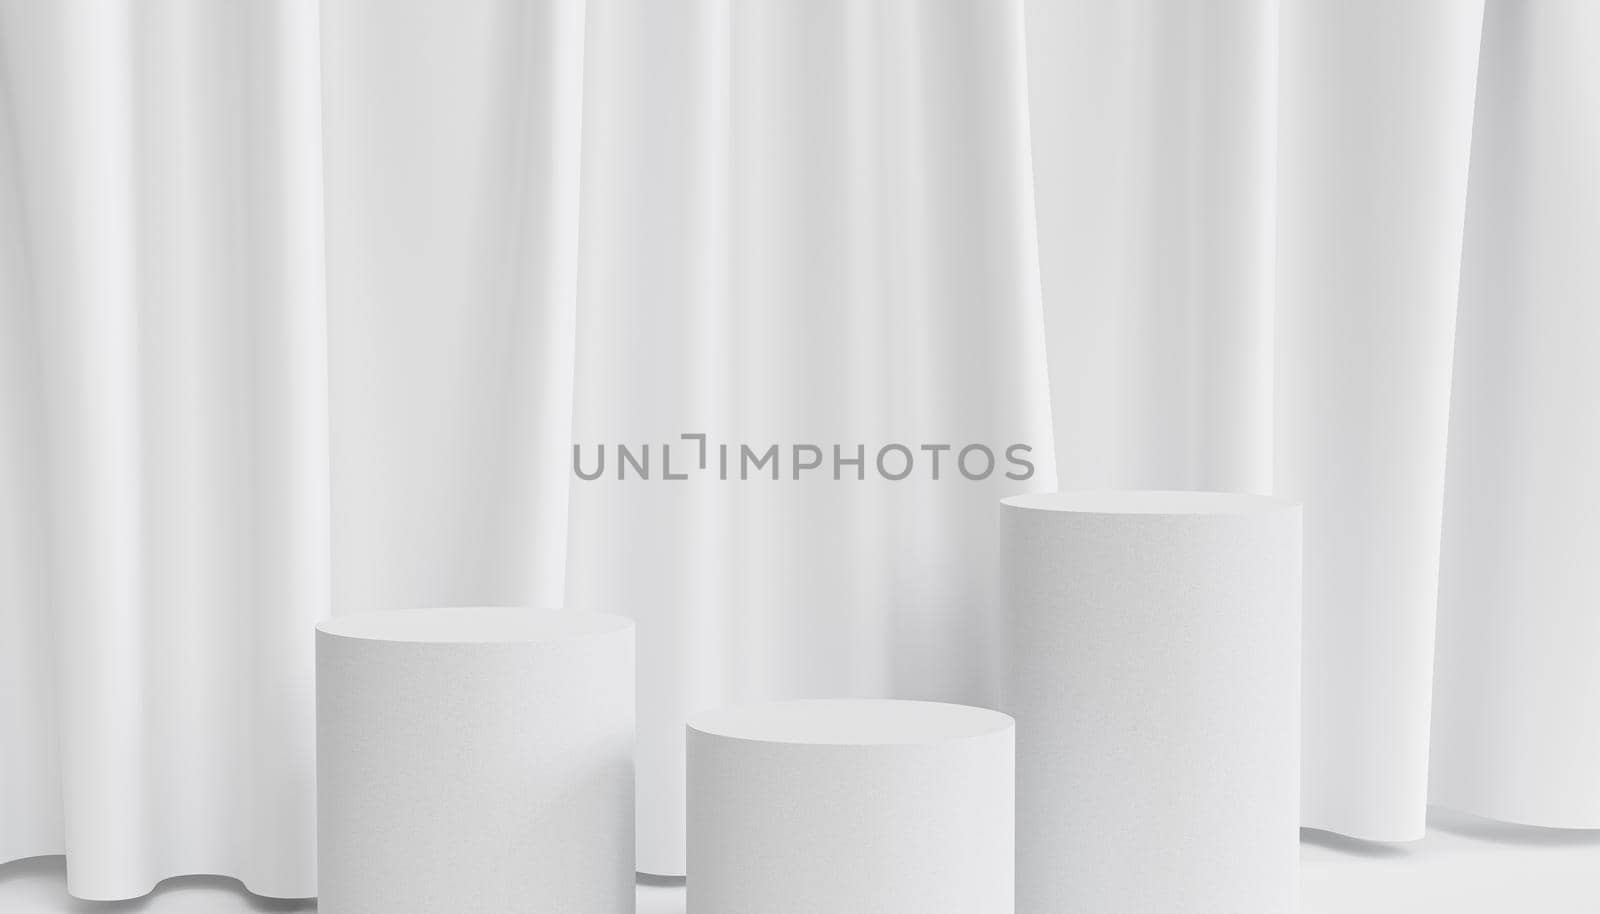 Cylinder podiums or pedestals for products or advertising on white background with curtains, minimal 3d render